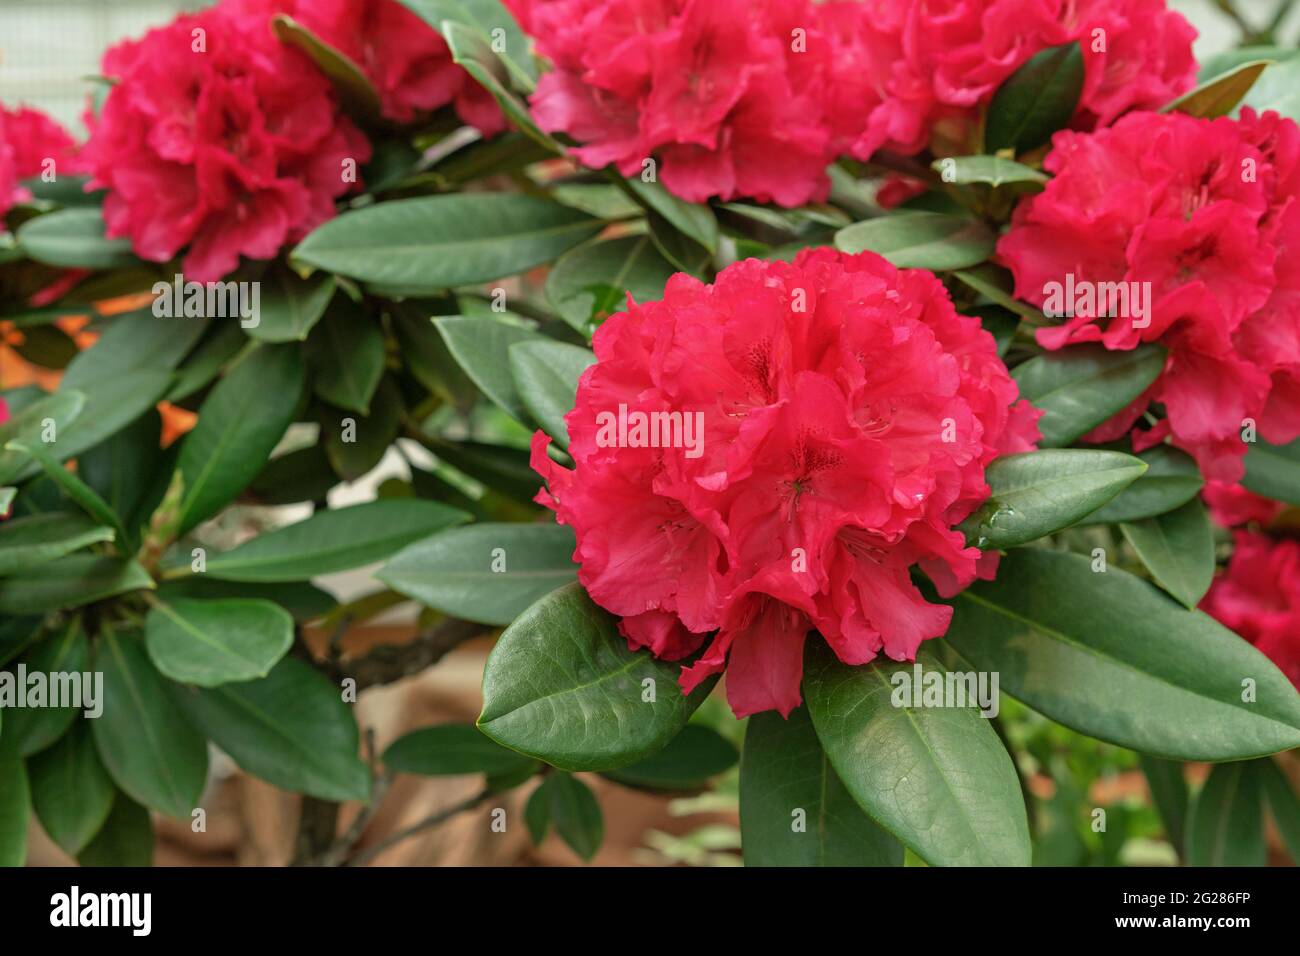 Pacific red rhododendron (Rhododendron macrophyllum) is a large-leaved species of rhododendron native to the Pacific coast of North America. Stock Photo